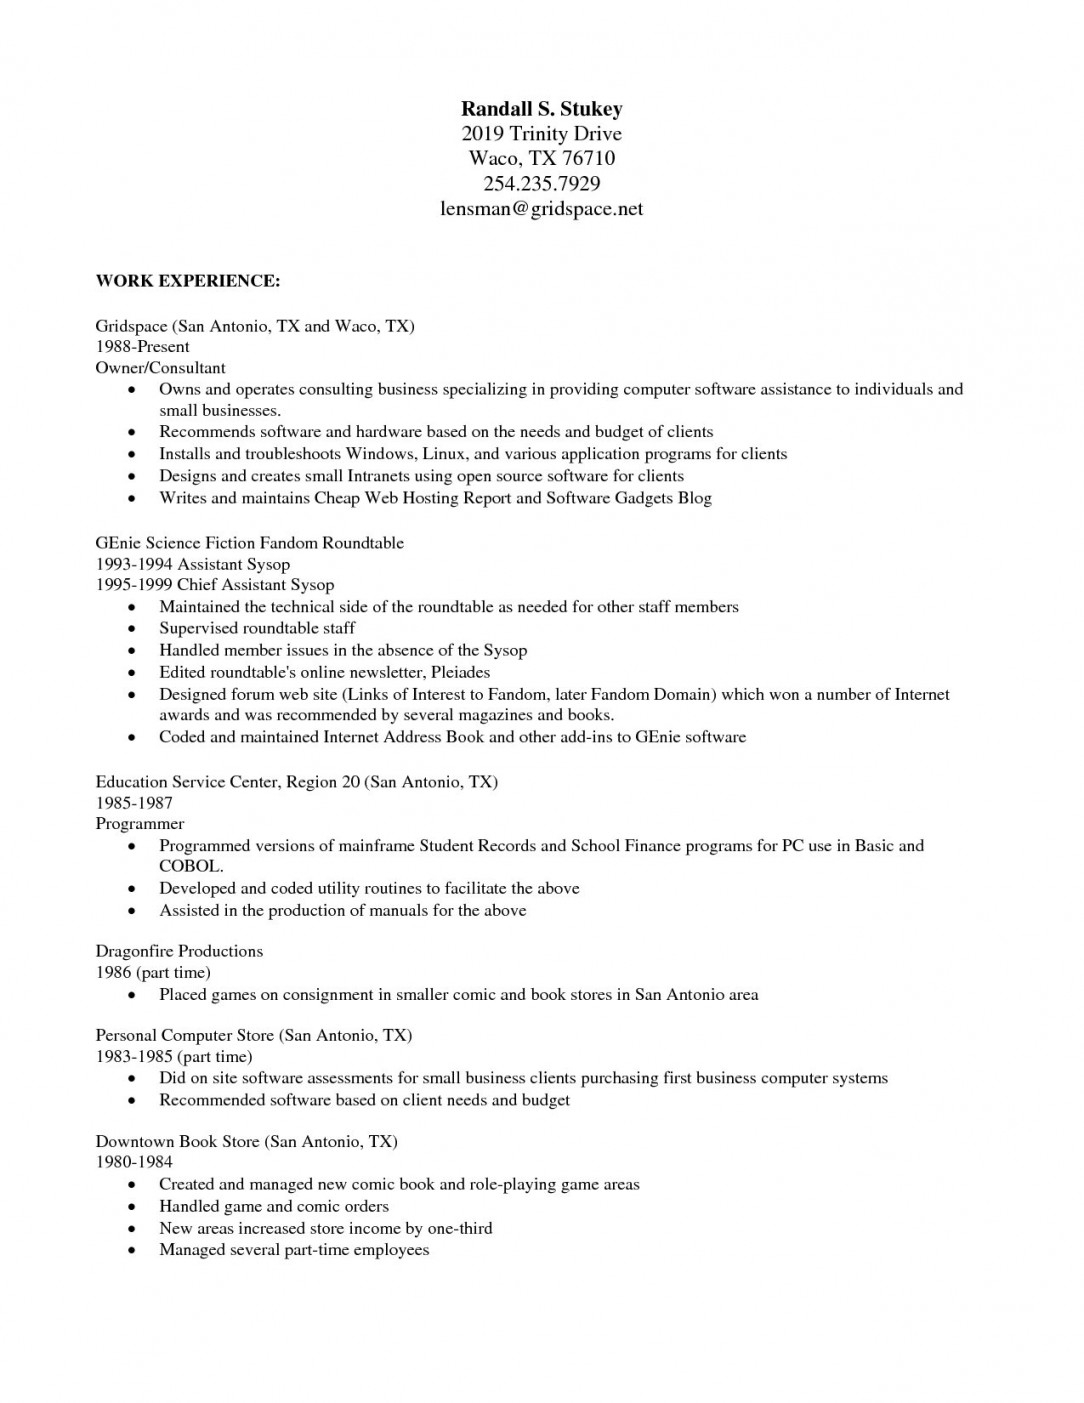 Openoffice Cover Letter Template - Resume Templates for Openoffice Free